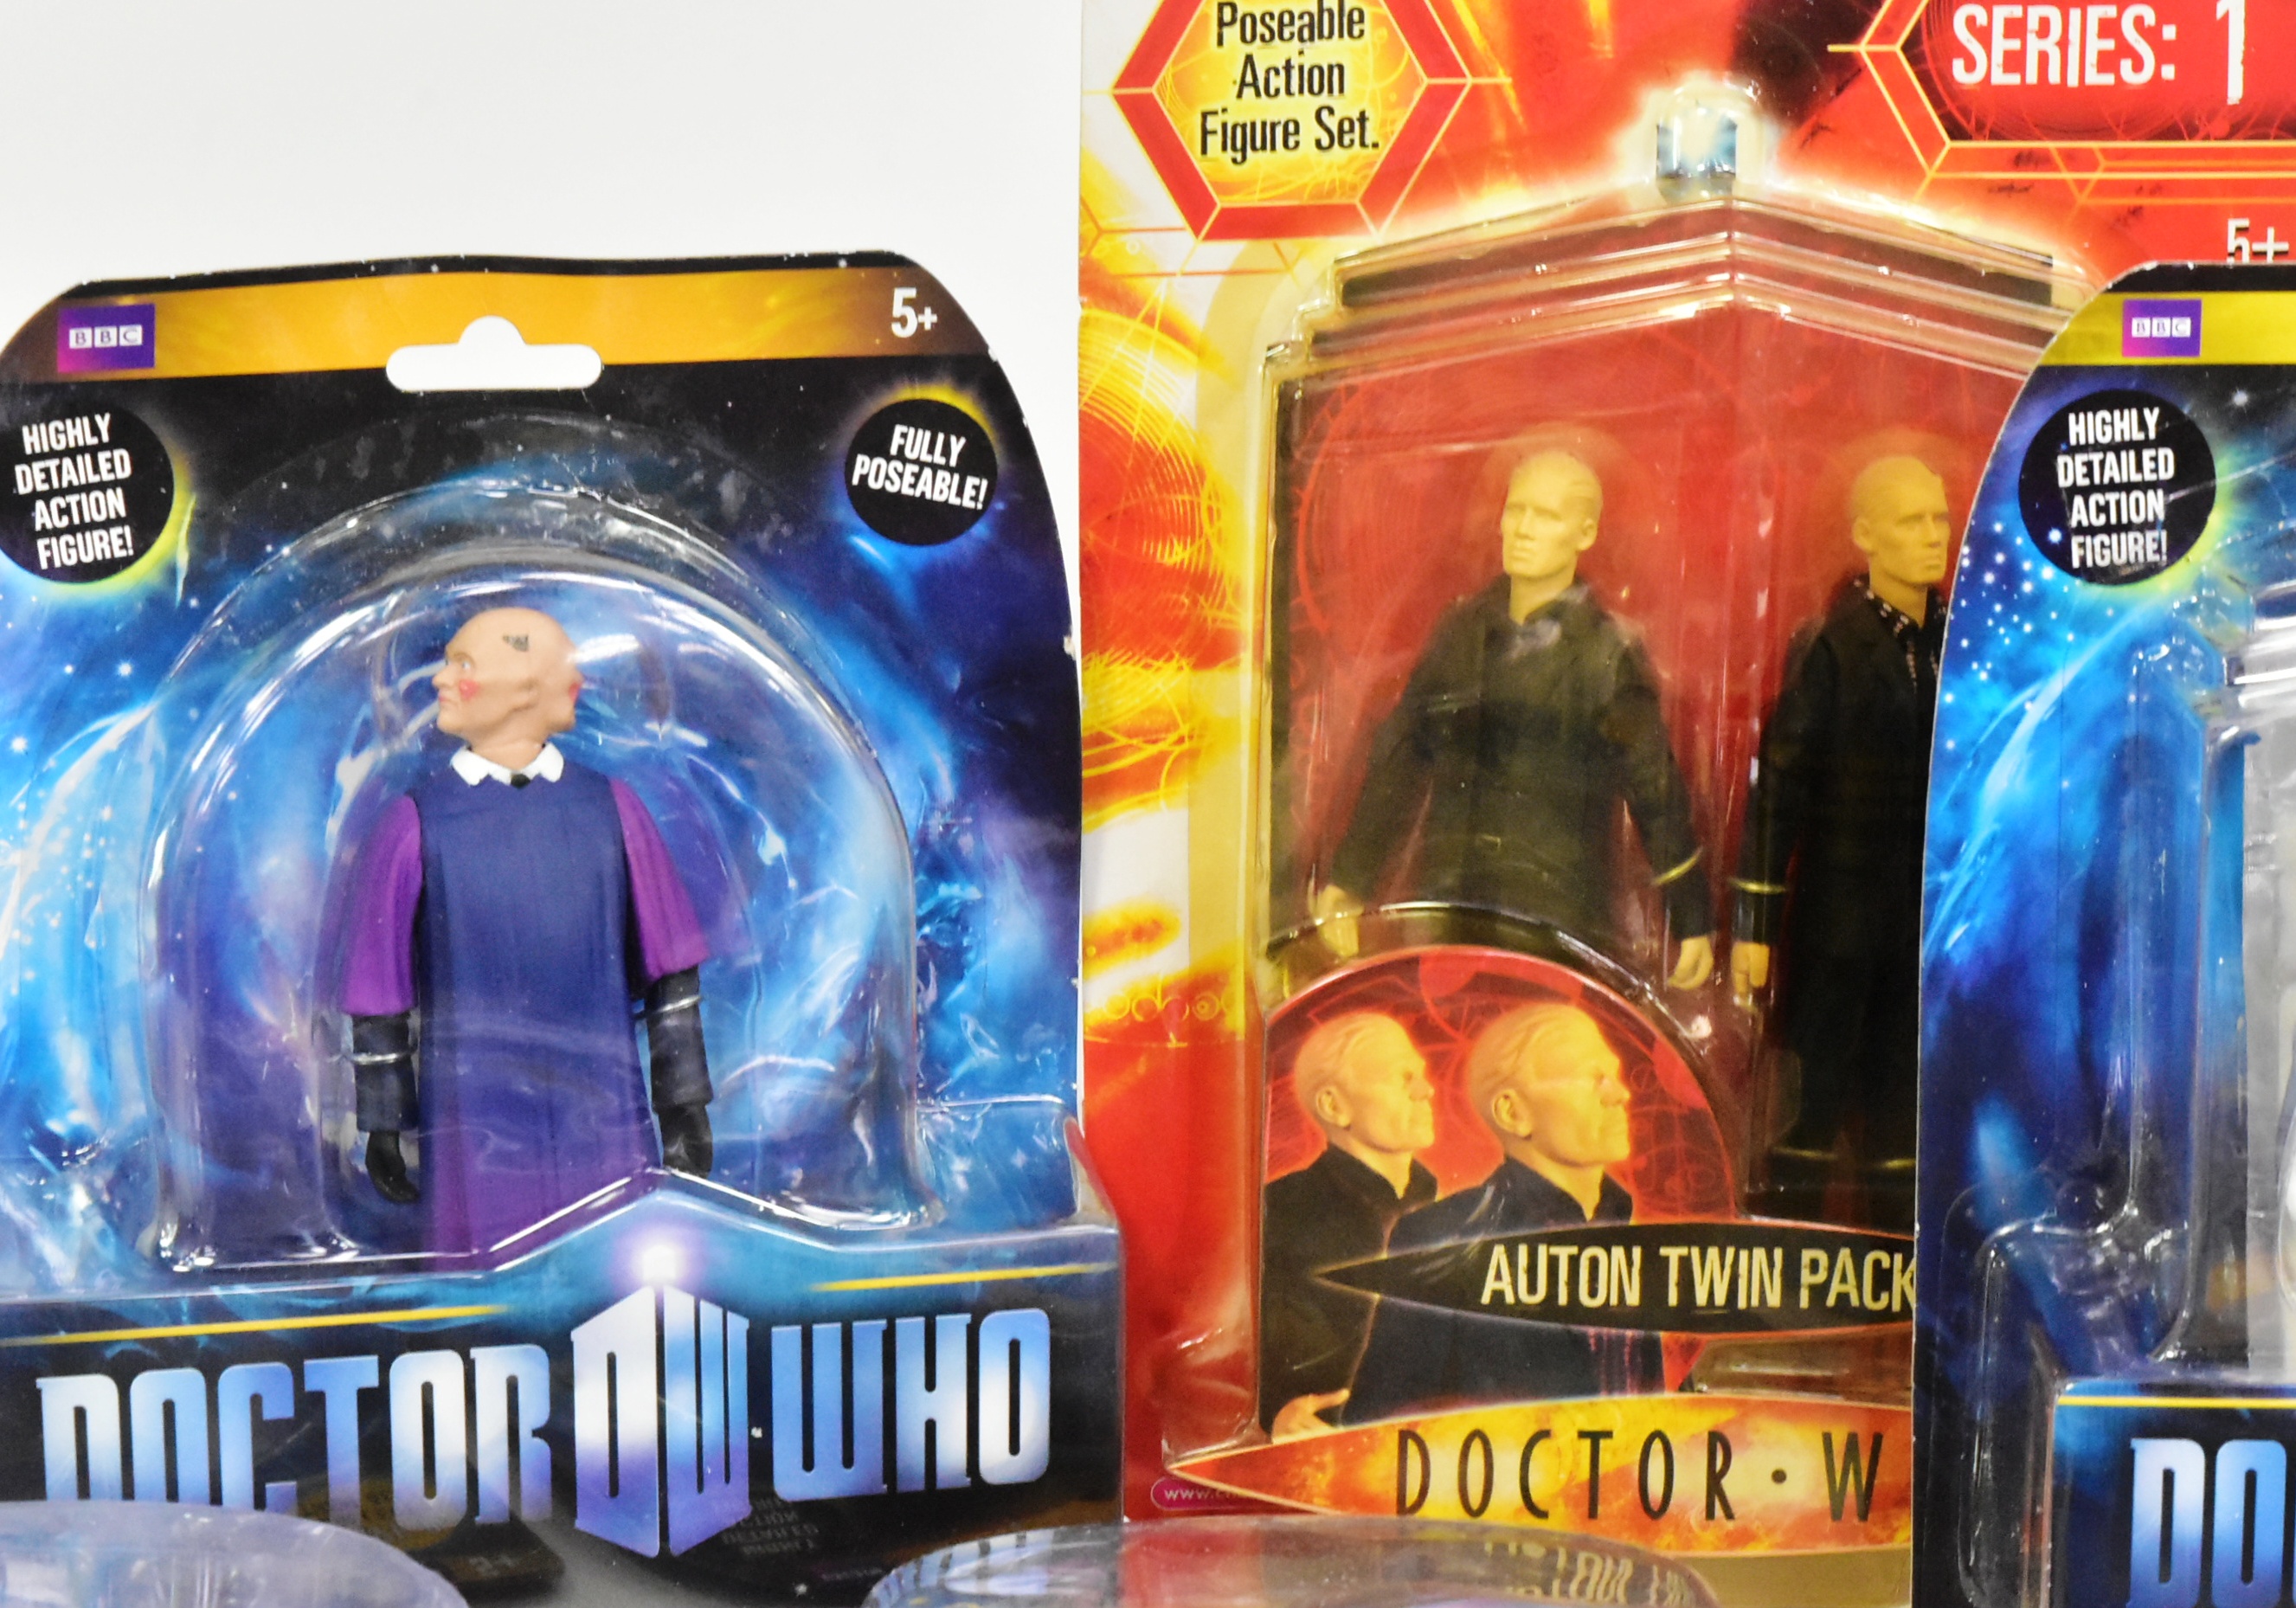 DOCTOR WHO - CHARACTER OPTIONS - CARDED ACTION FIGURES - Image 2 of 5